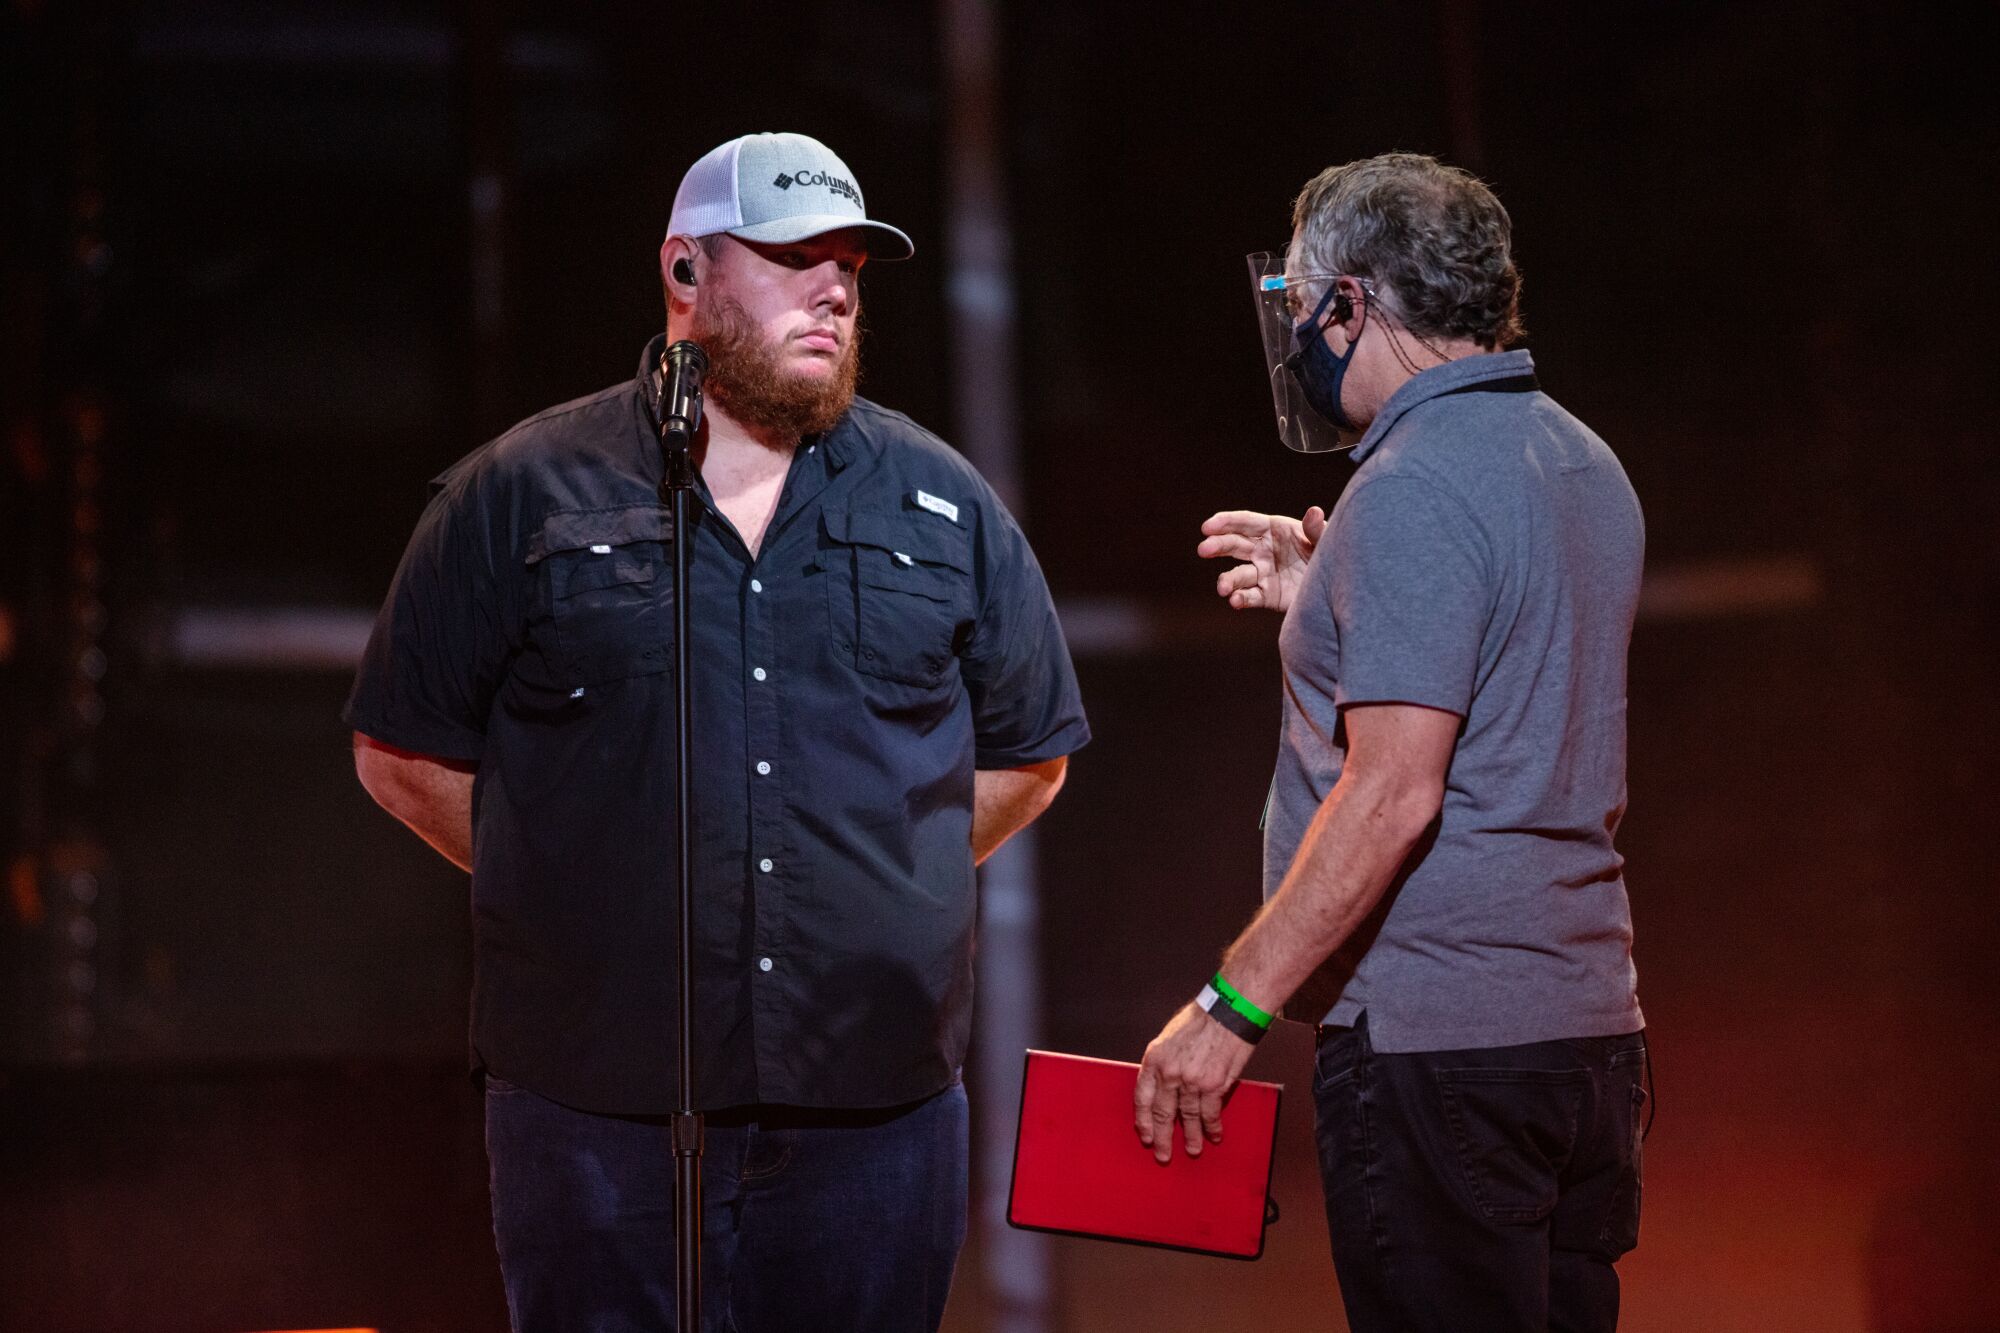 Stage manager Gary Napoli with Luke Combs